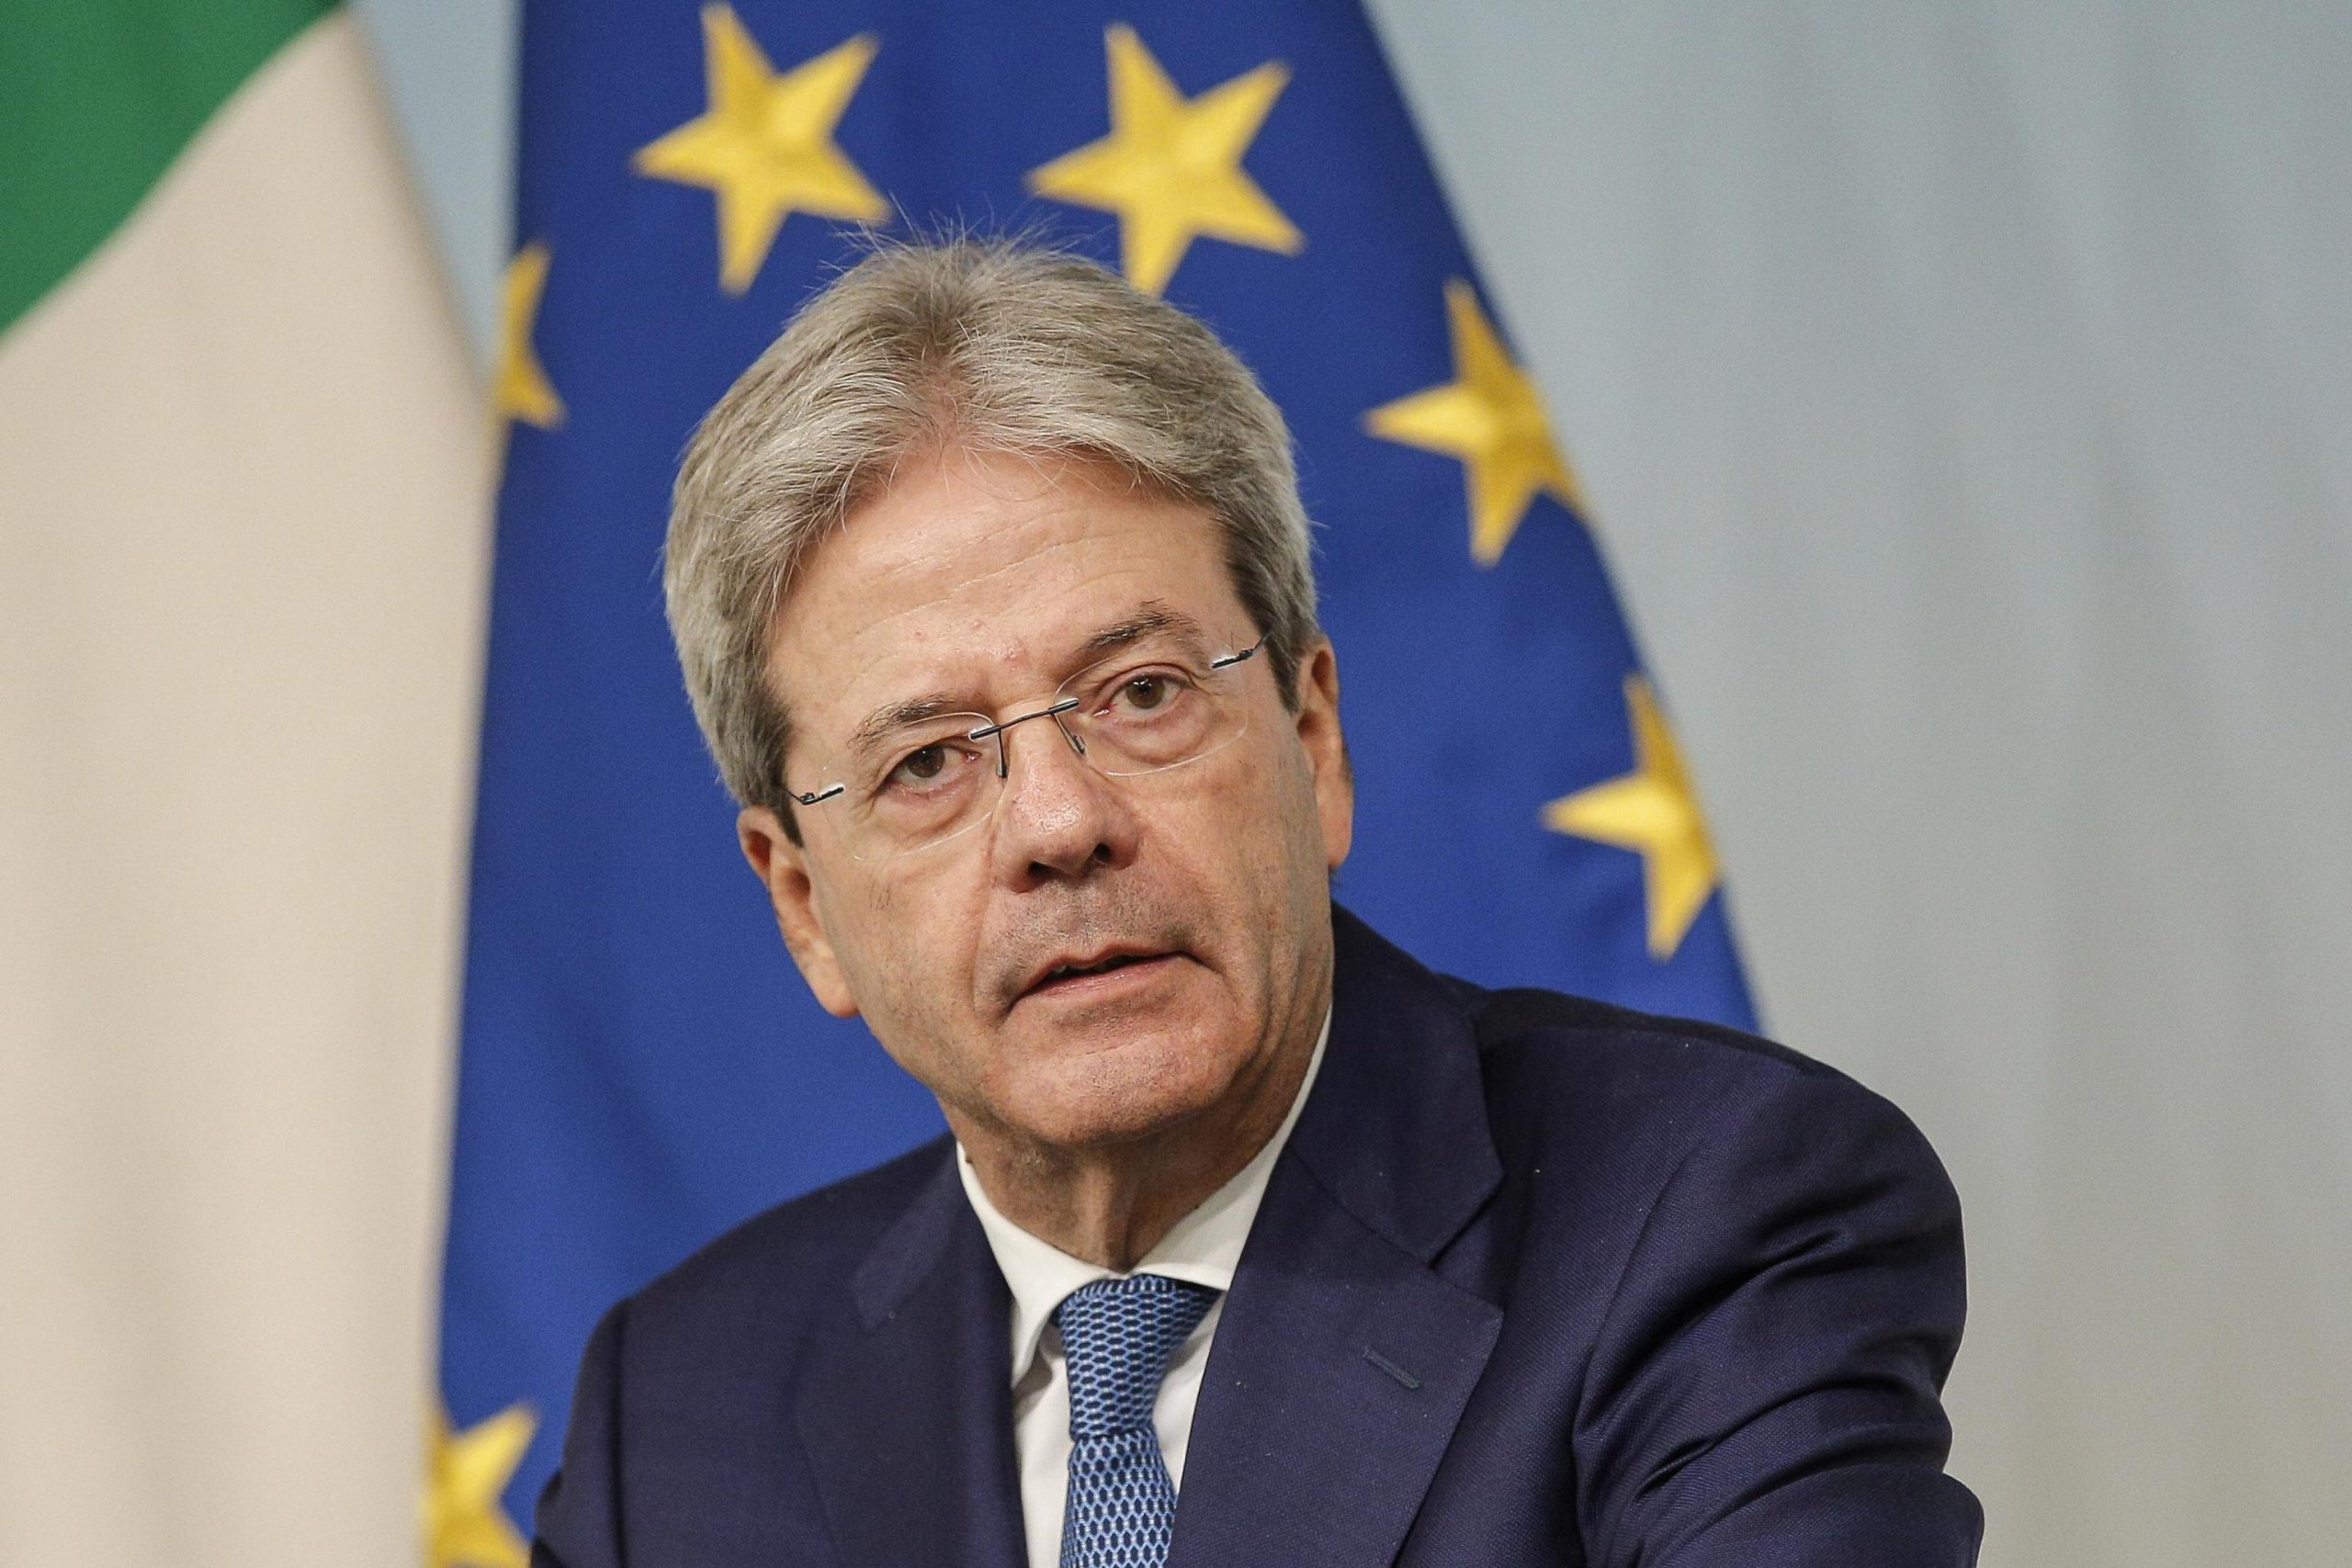 Gentiloni: “Greece today closes a difficult chapter in its long and proud history”